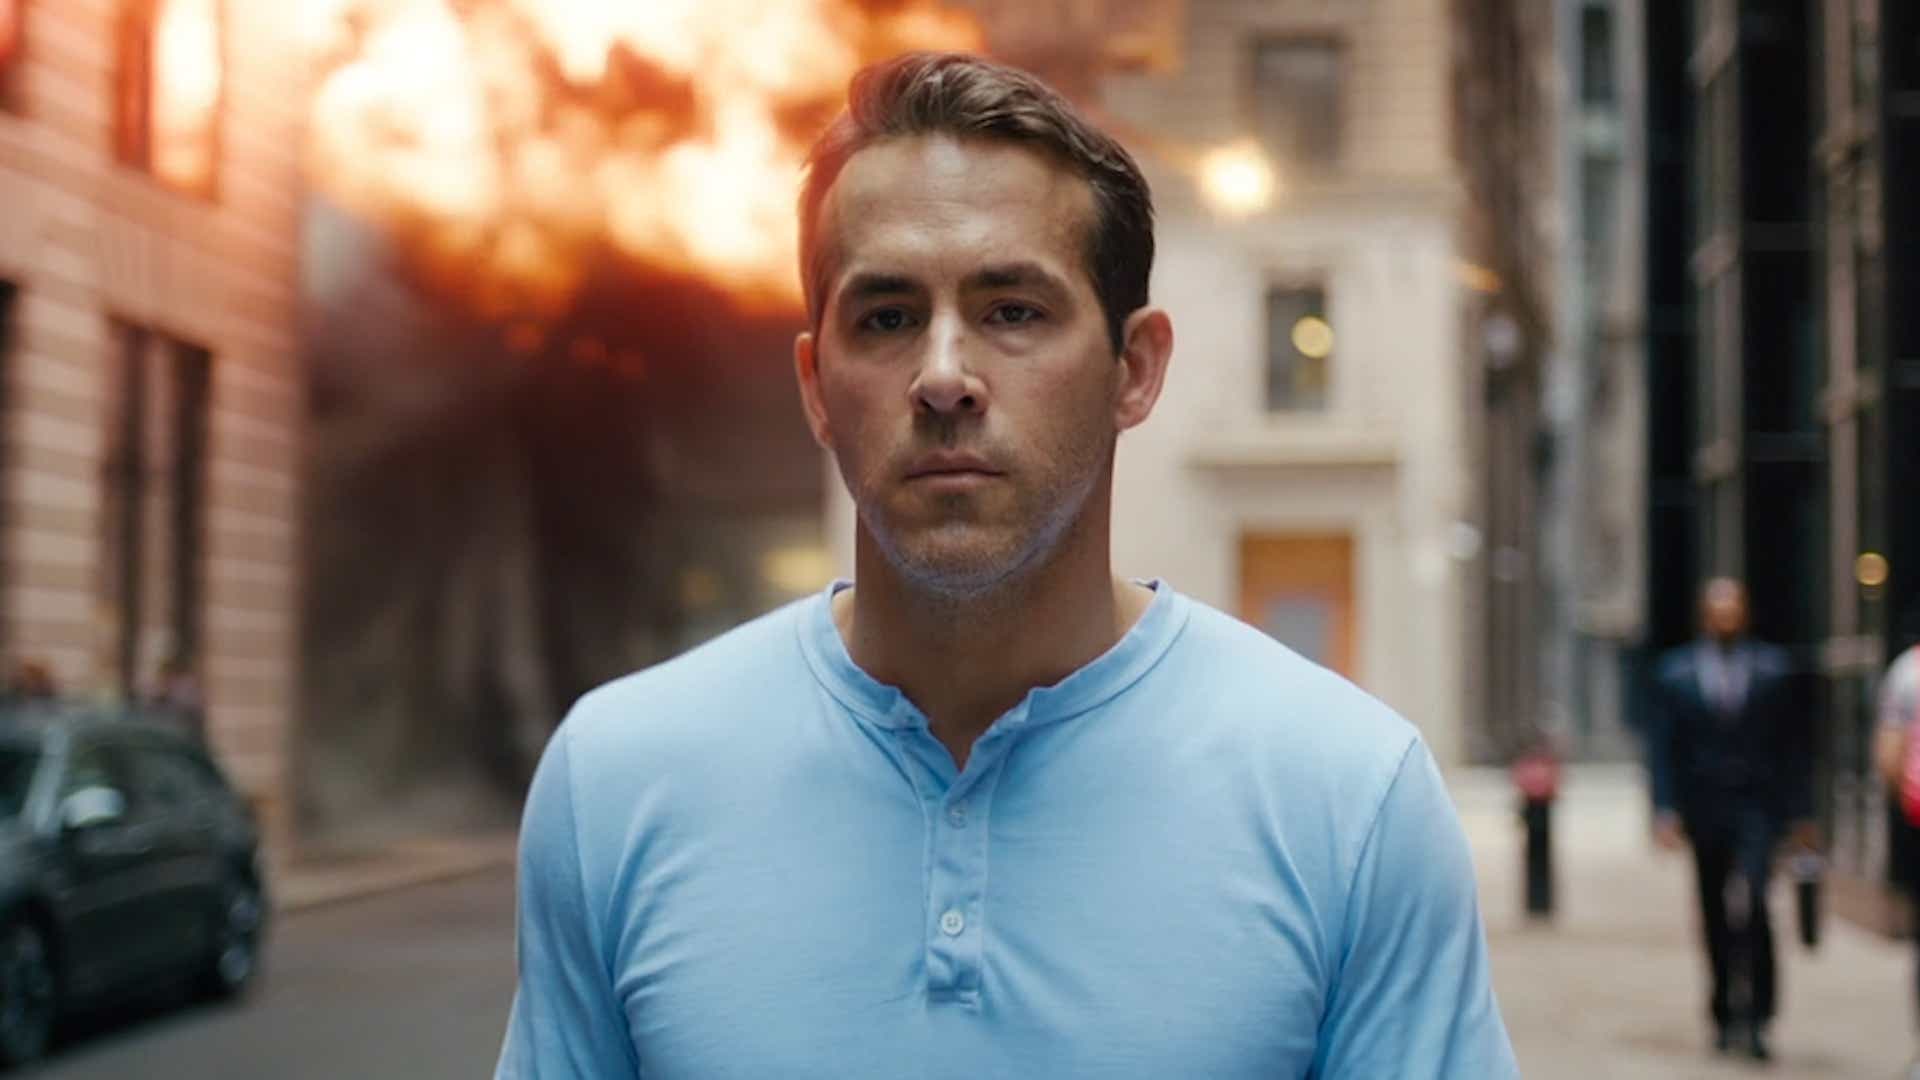 Guy Starring Ryan Reynolds To Hit Theaters July